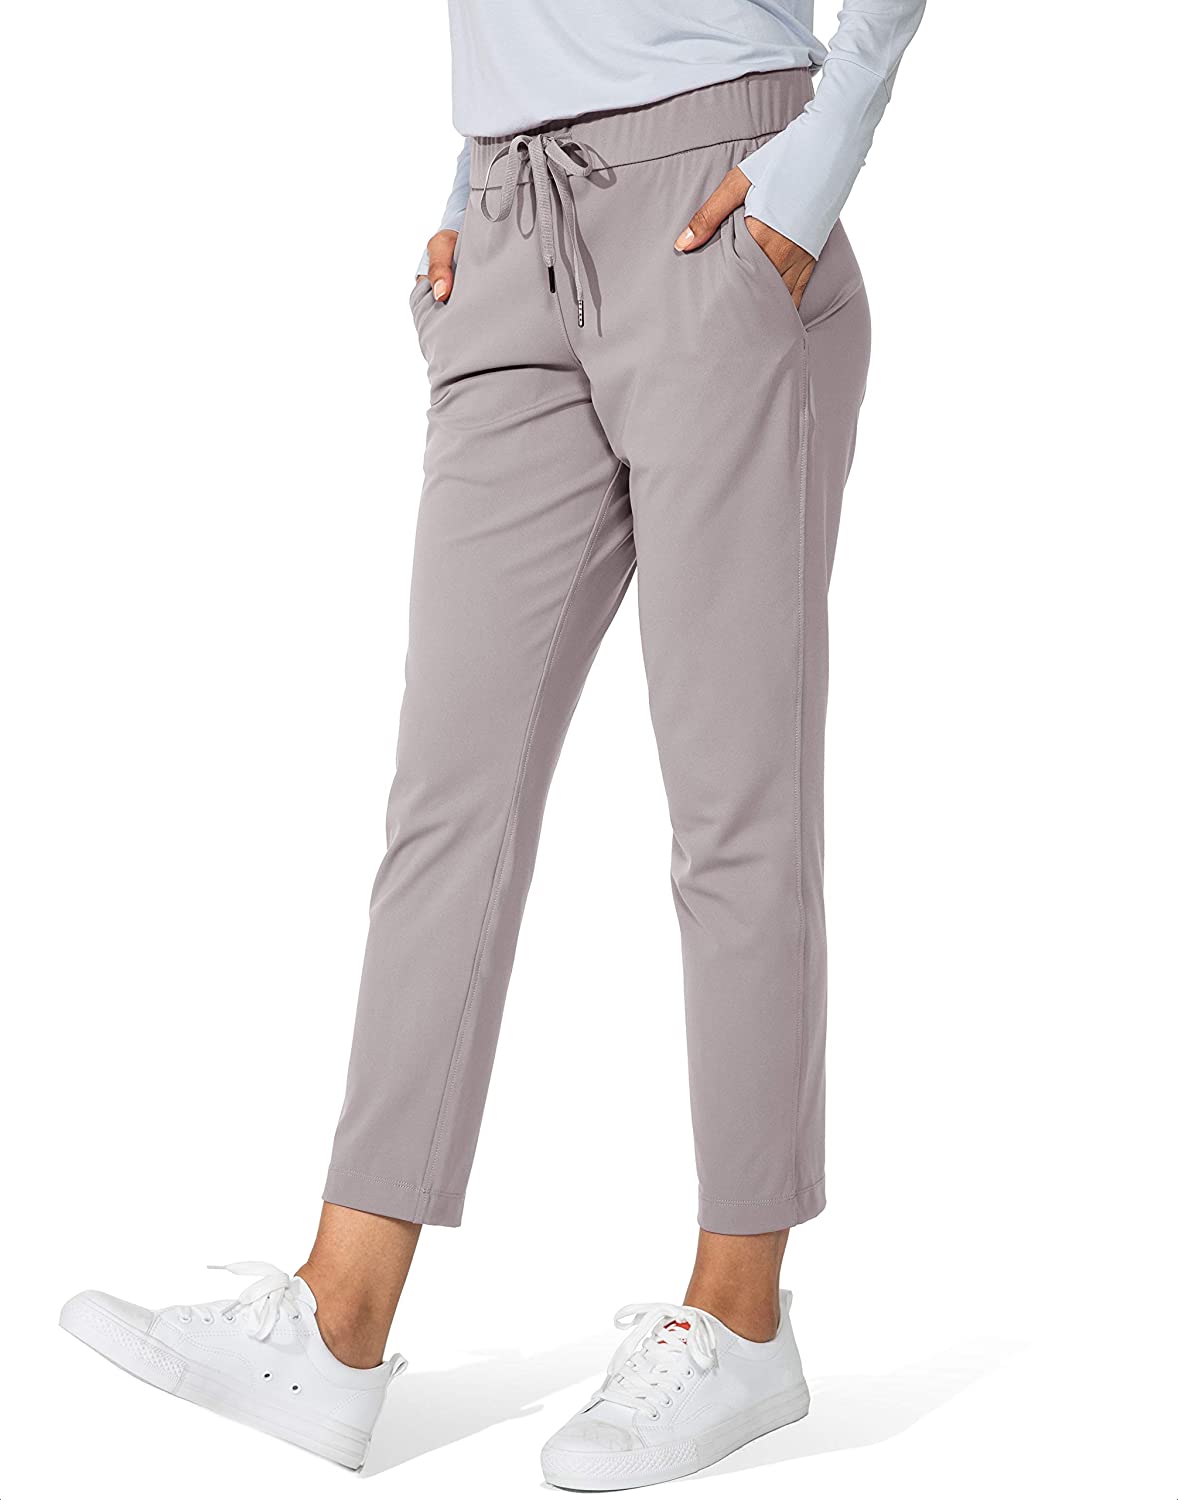 G Gradual Women's Pants with Deep Pockets 7/8 Stretch Sweatpants for Women  Athle